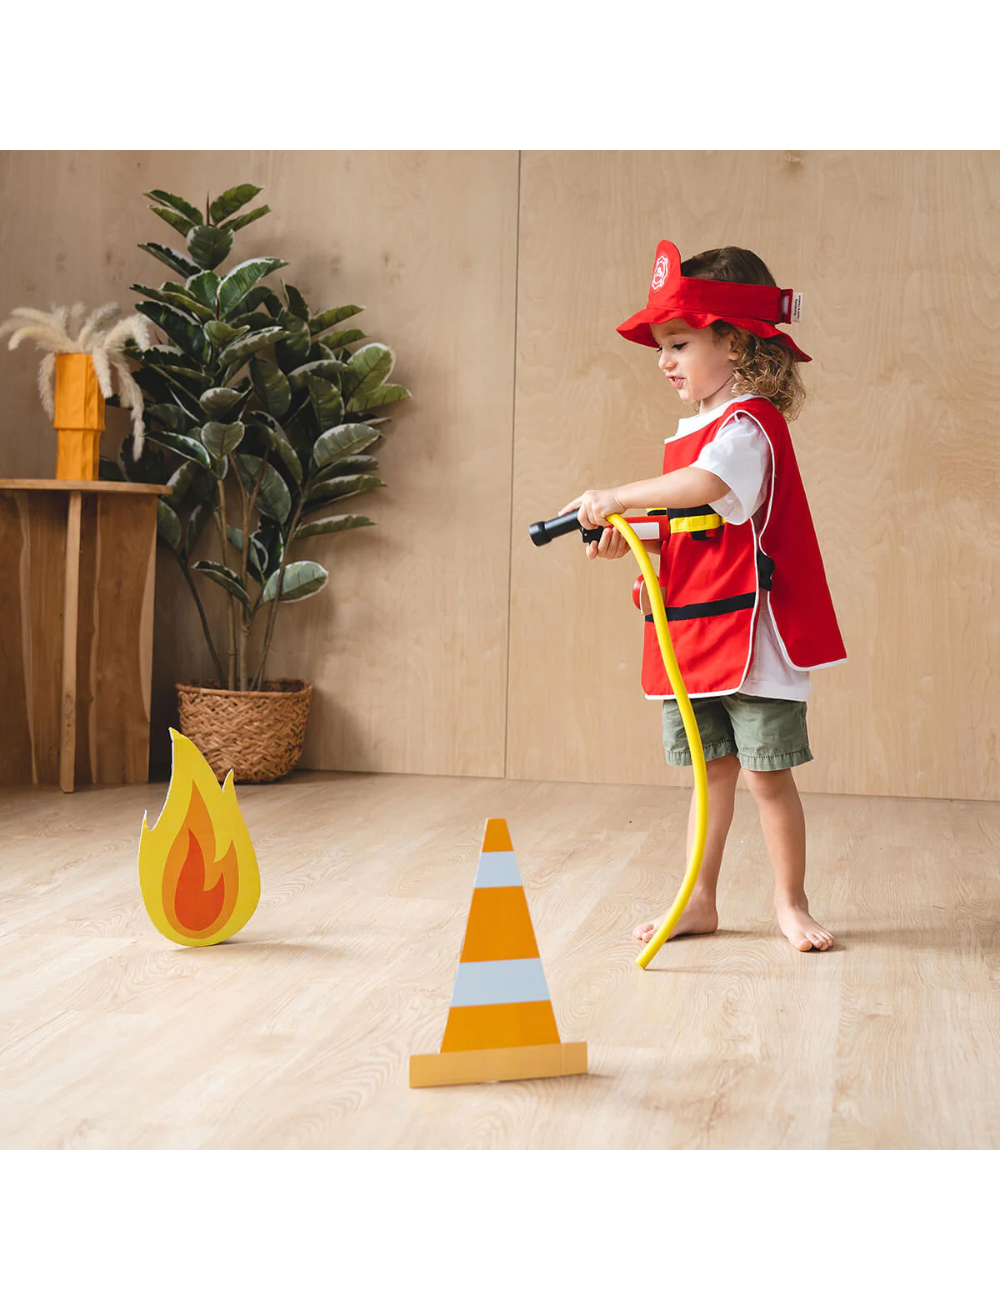 Firefighter play set by PlanToys